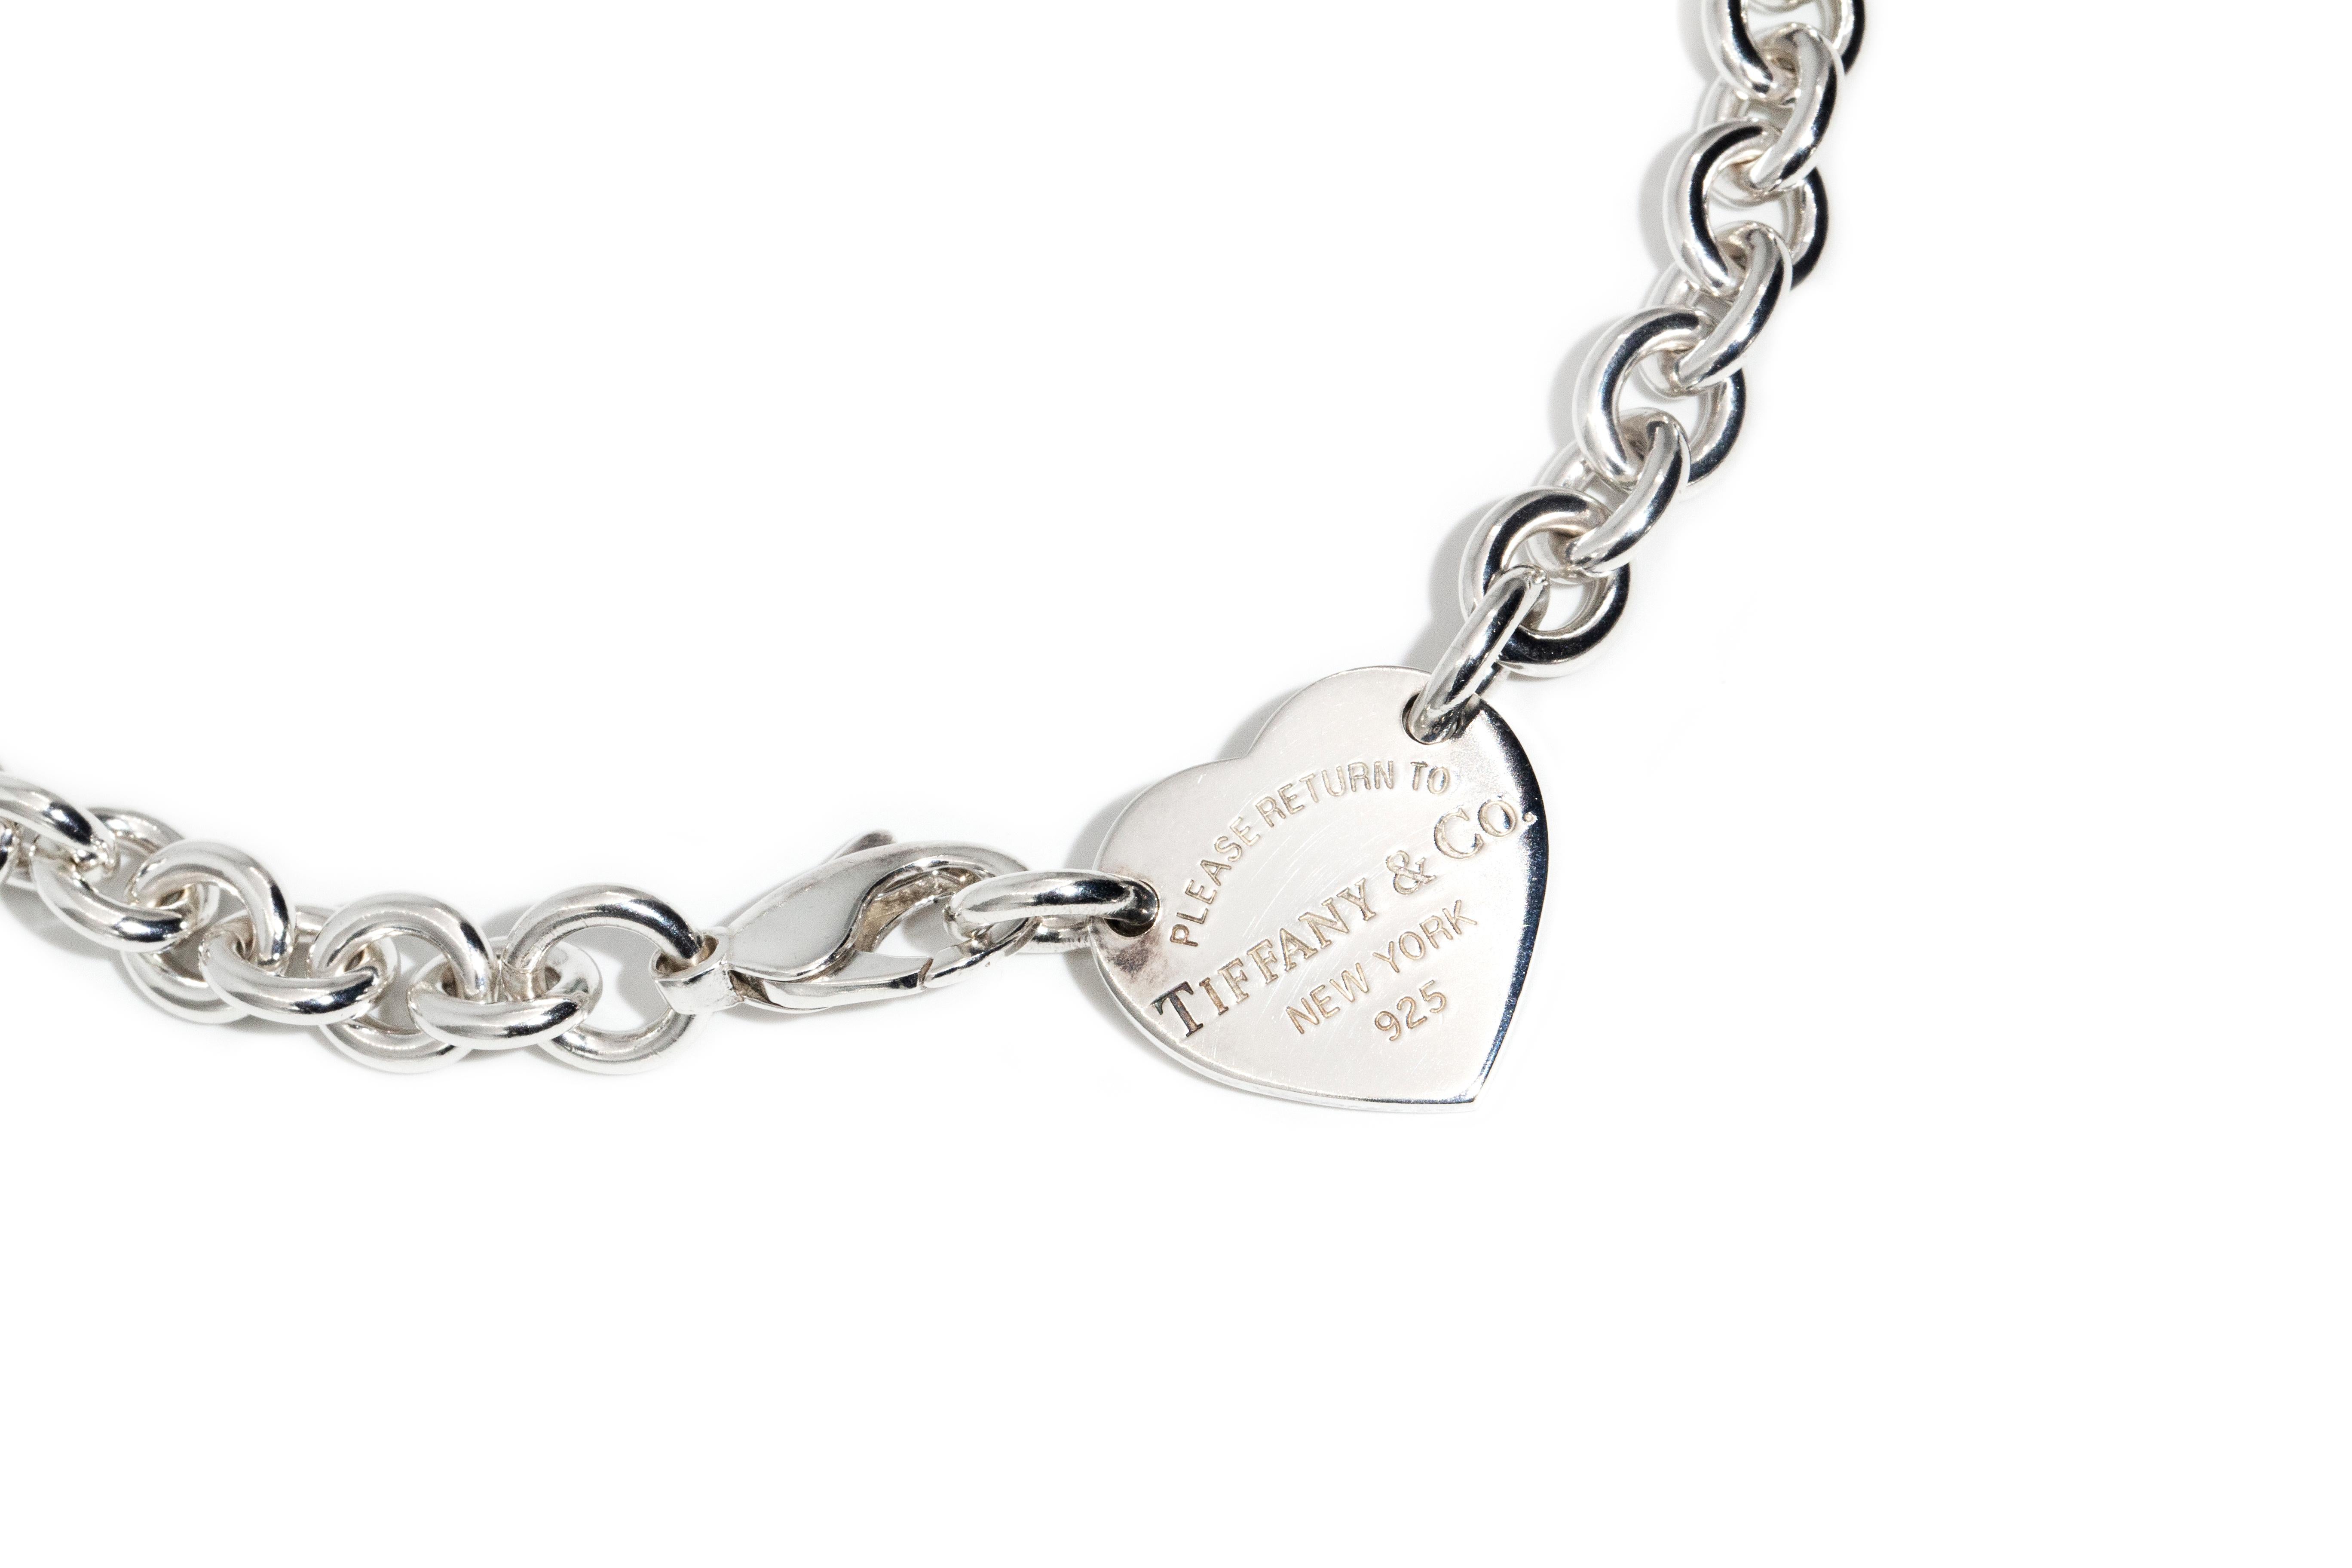 Women's Tiffany & Co. Sterling Silver Chain Link Necklace & Hallmarked Heart Tag Pendant